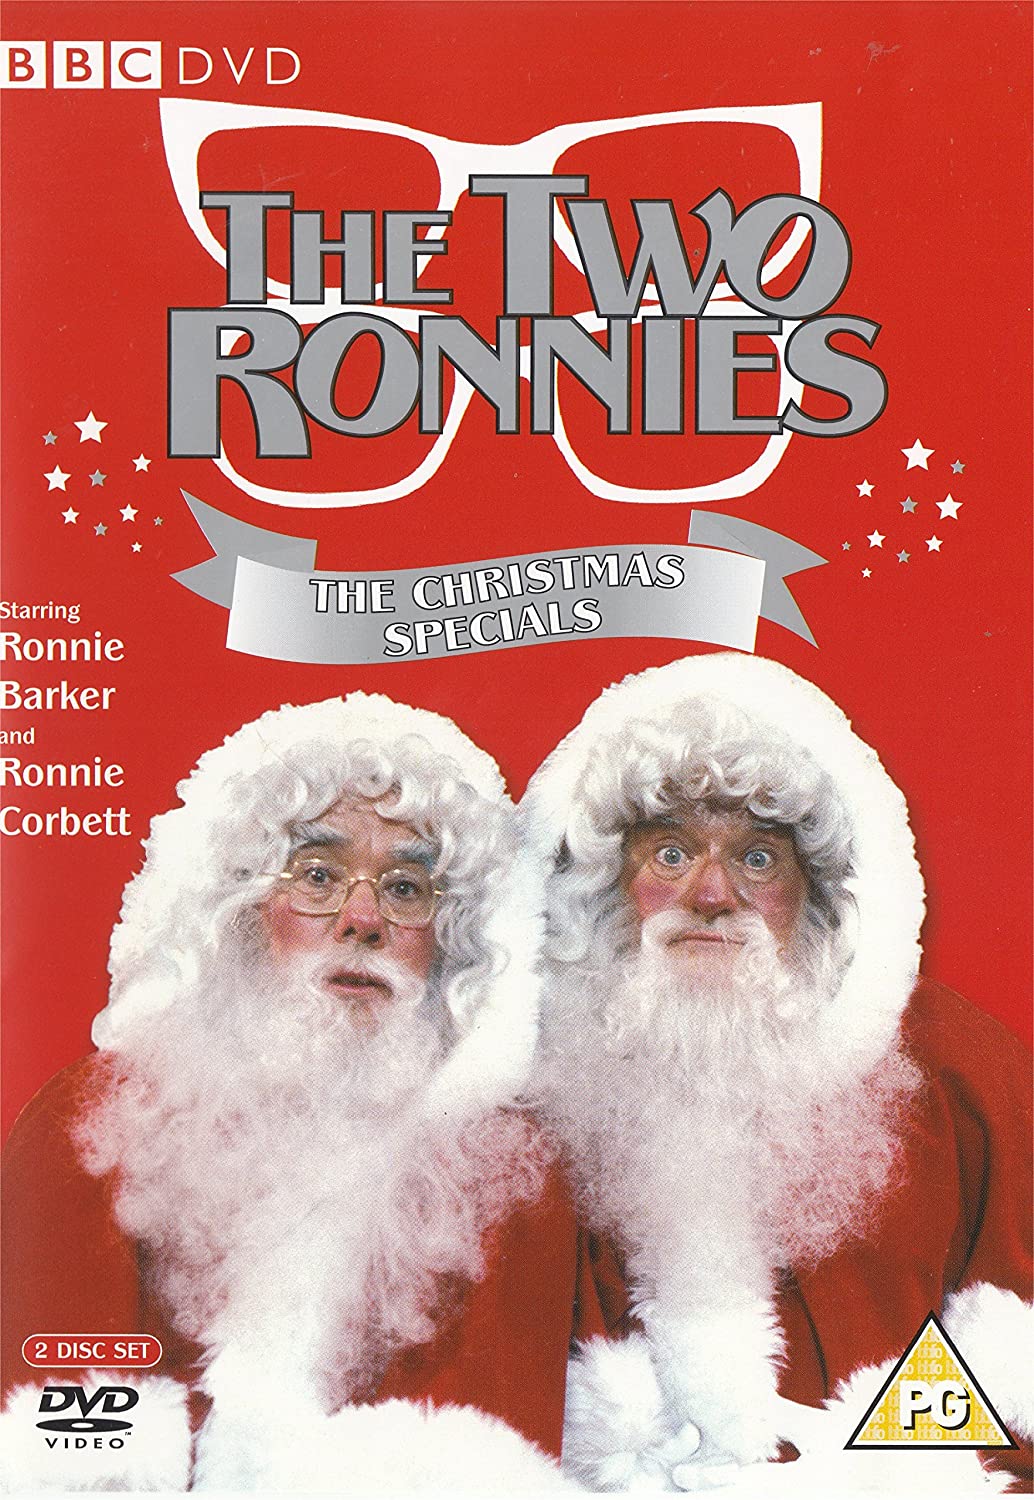 The Two Ronnies : The Complete BBC Christmas Specials